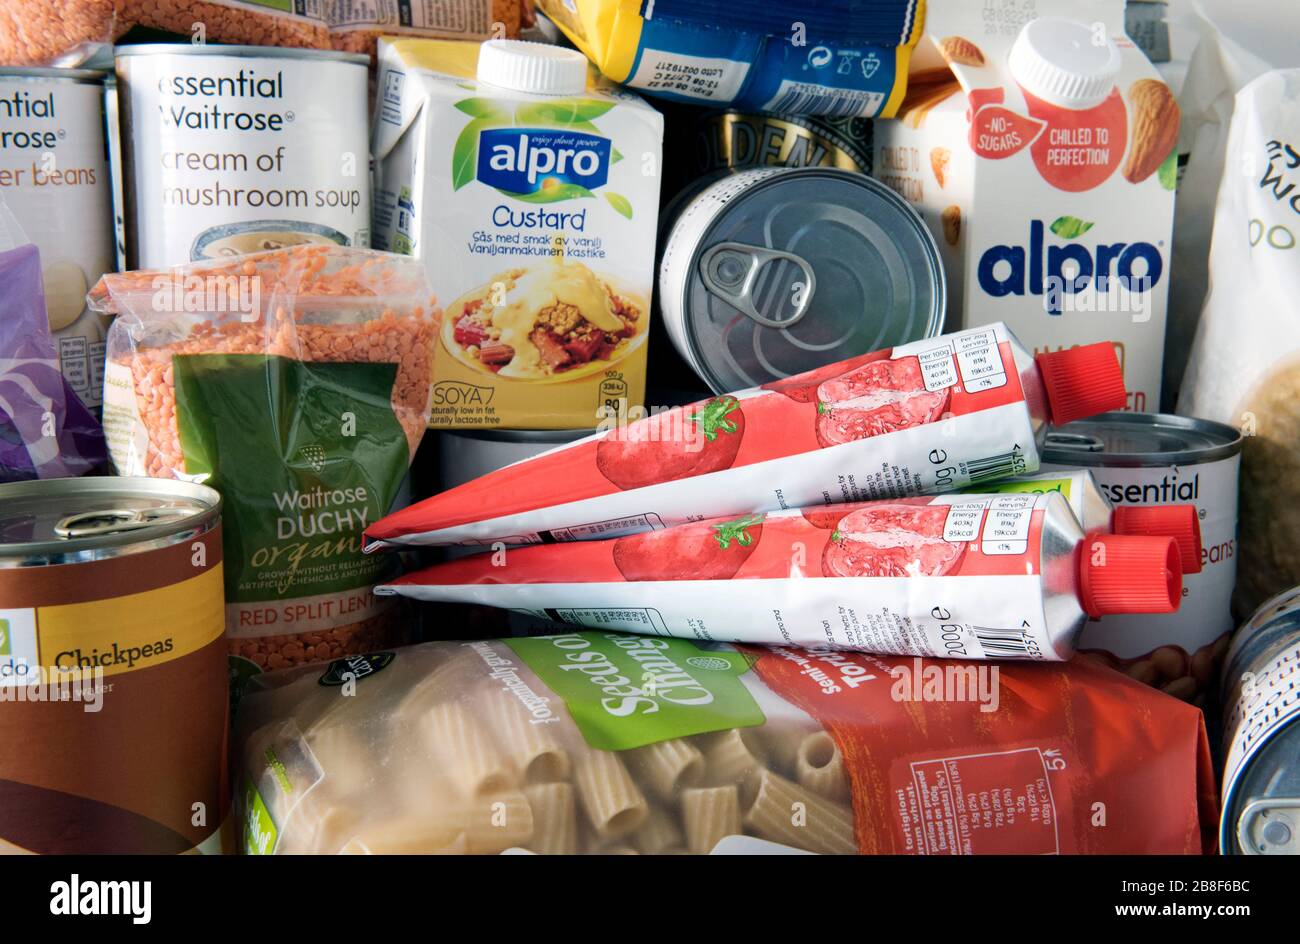 Stockpiled tins and packets of dried food piled up on kitchen work surface after home delivery.  Stockpiling due to Coronavirus pandemic. UK Stock Photo